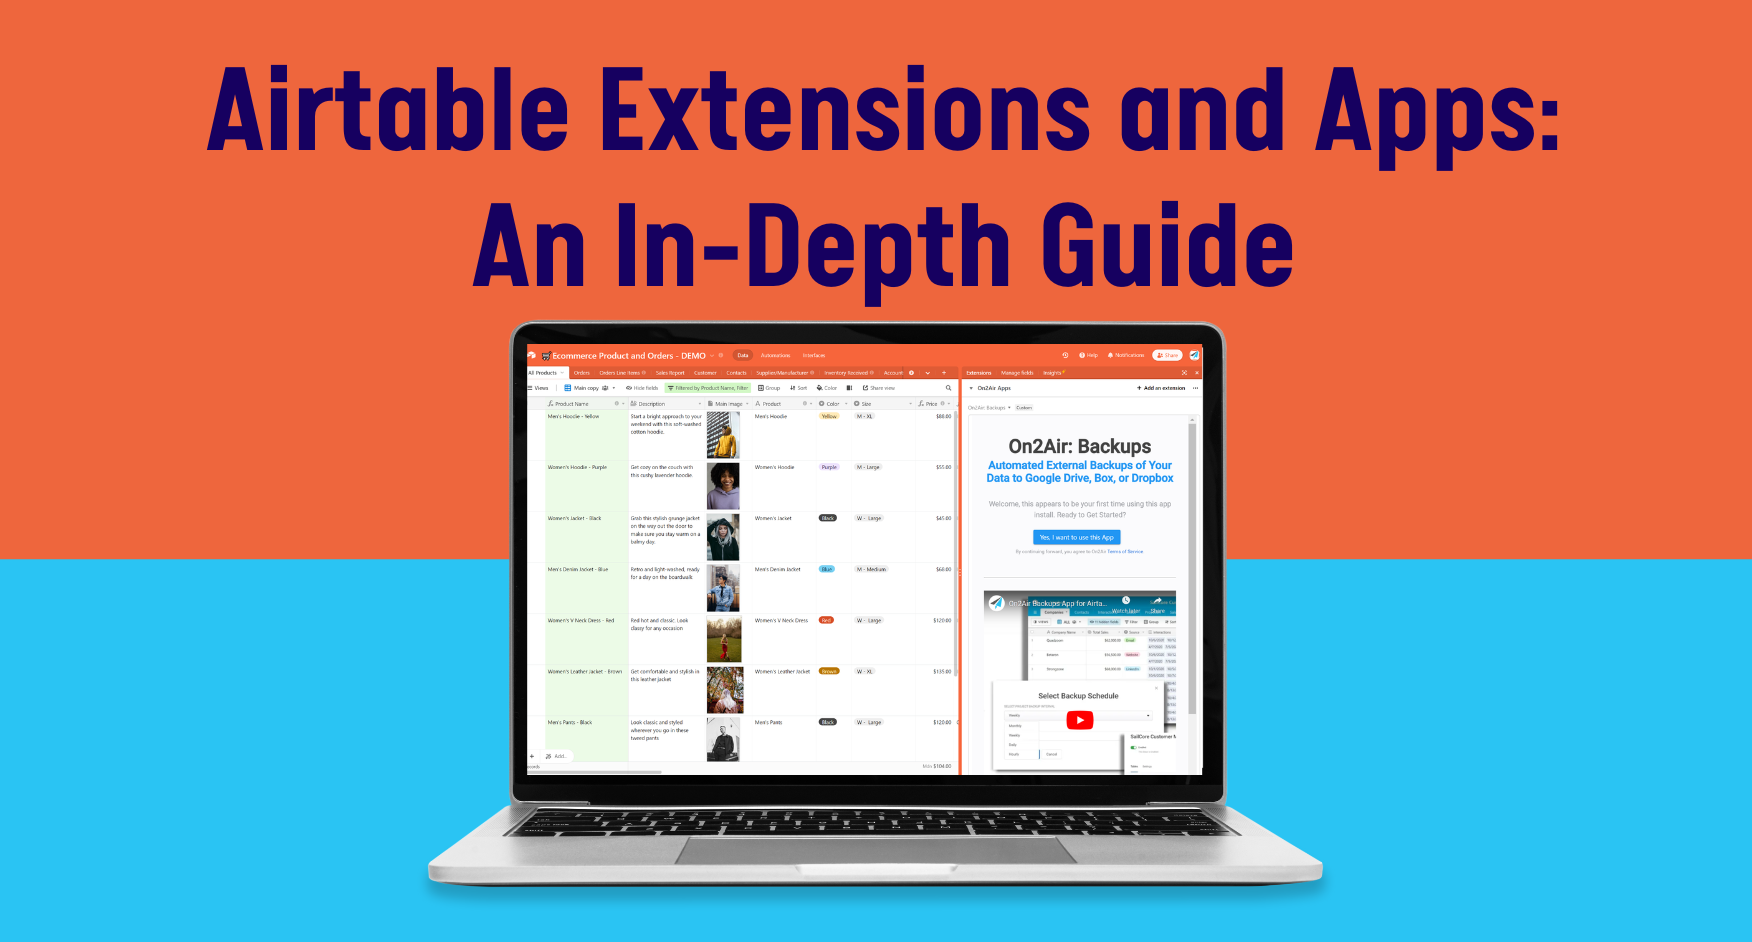 Airtasble apps and extensions: an in-depth guide